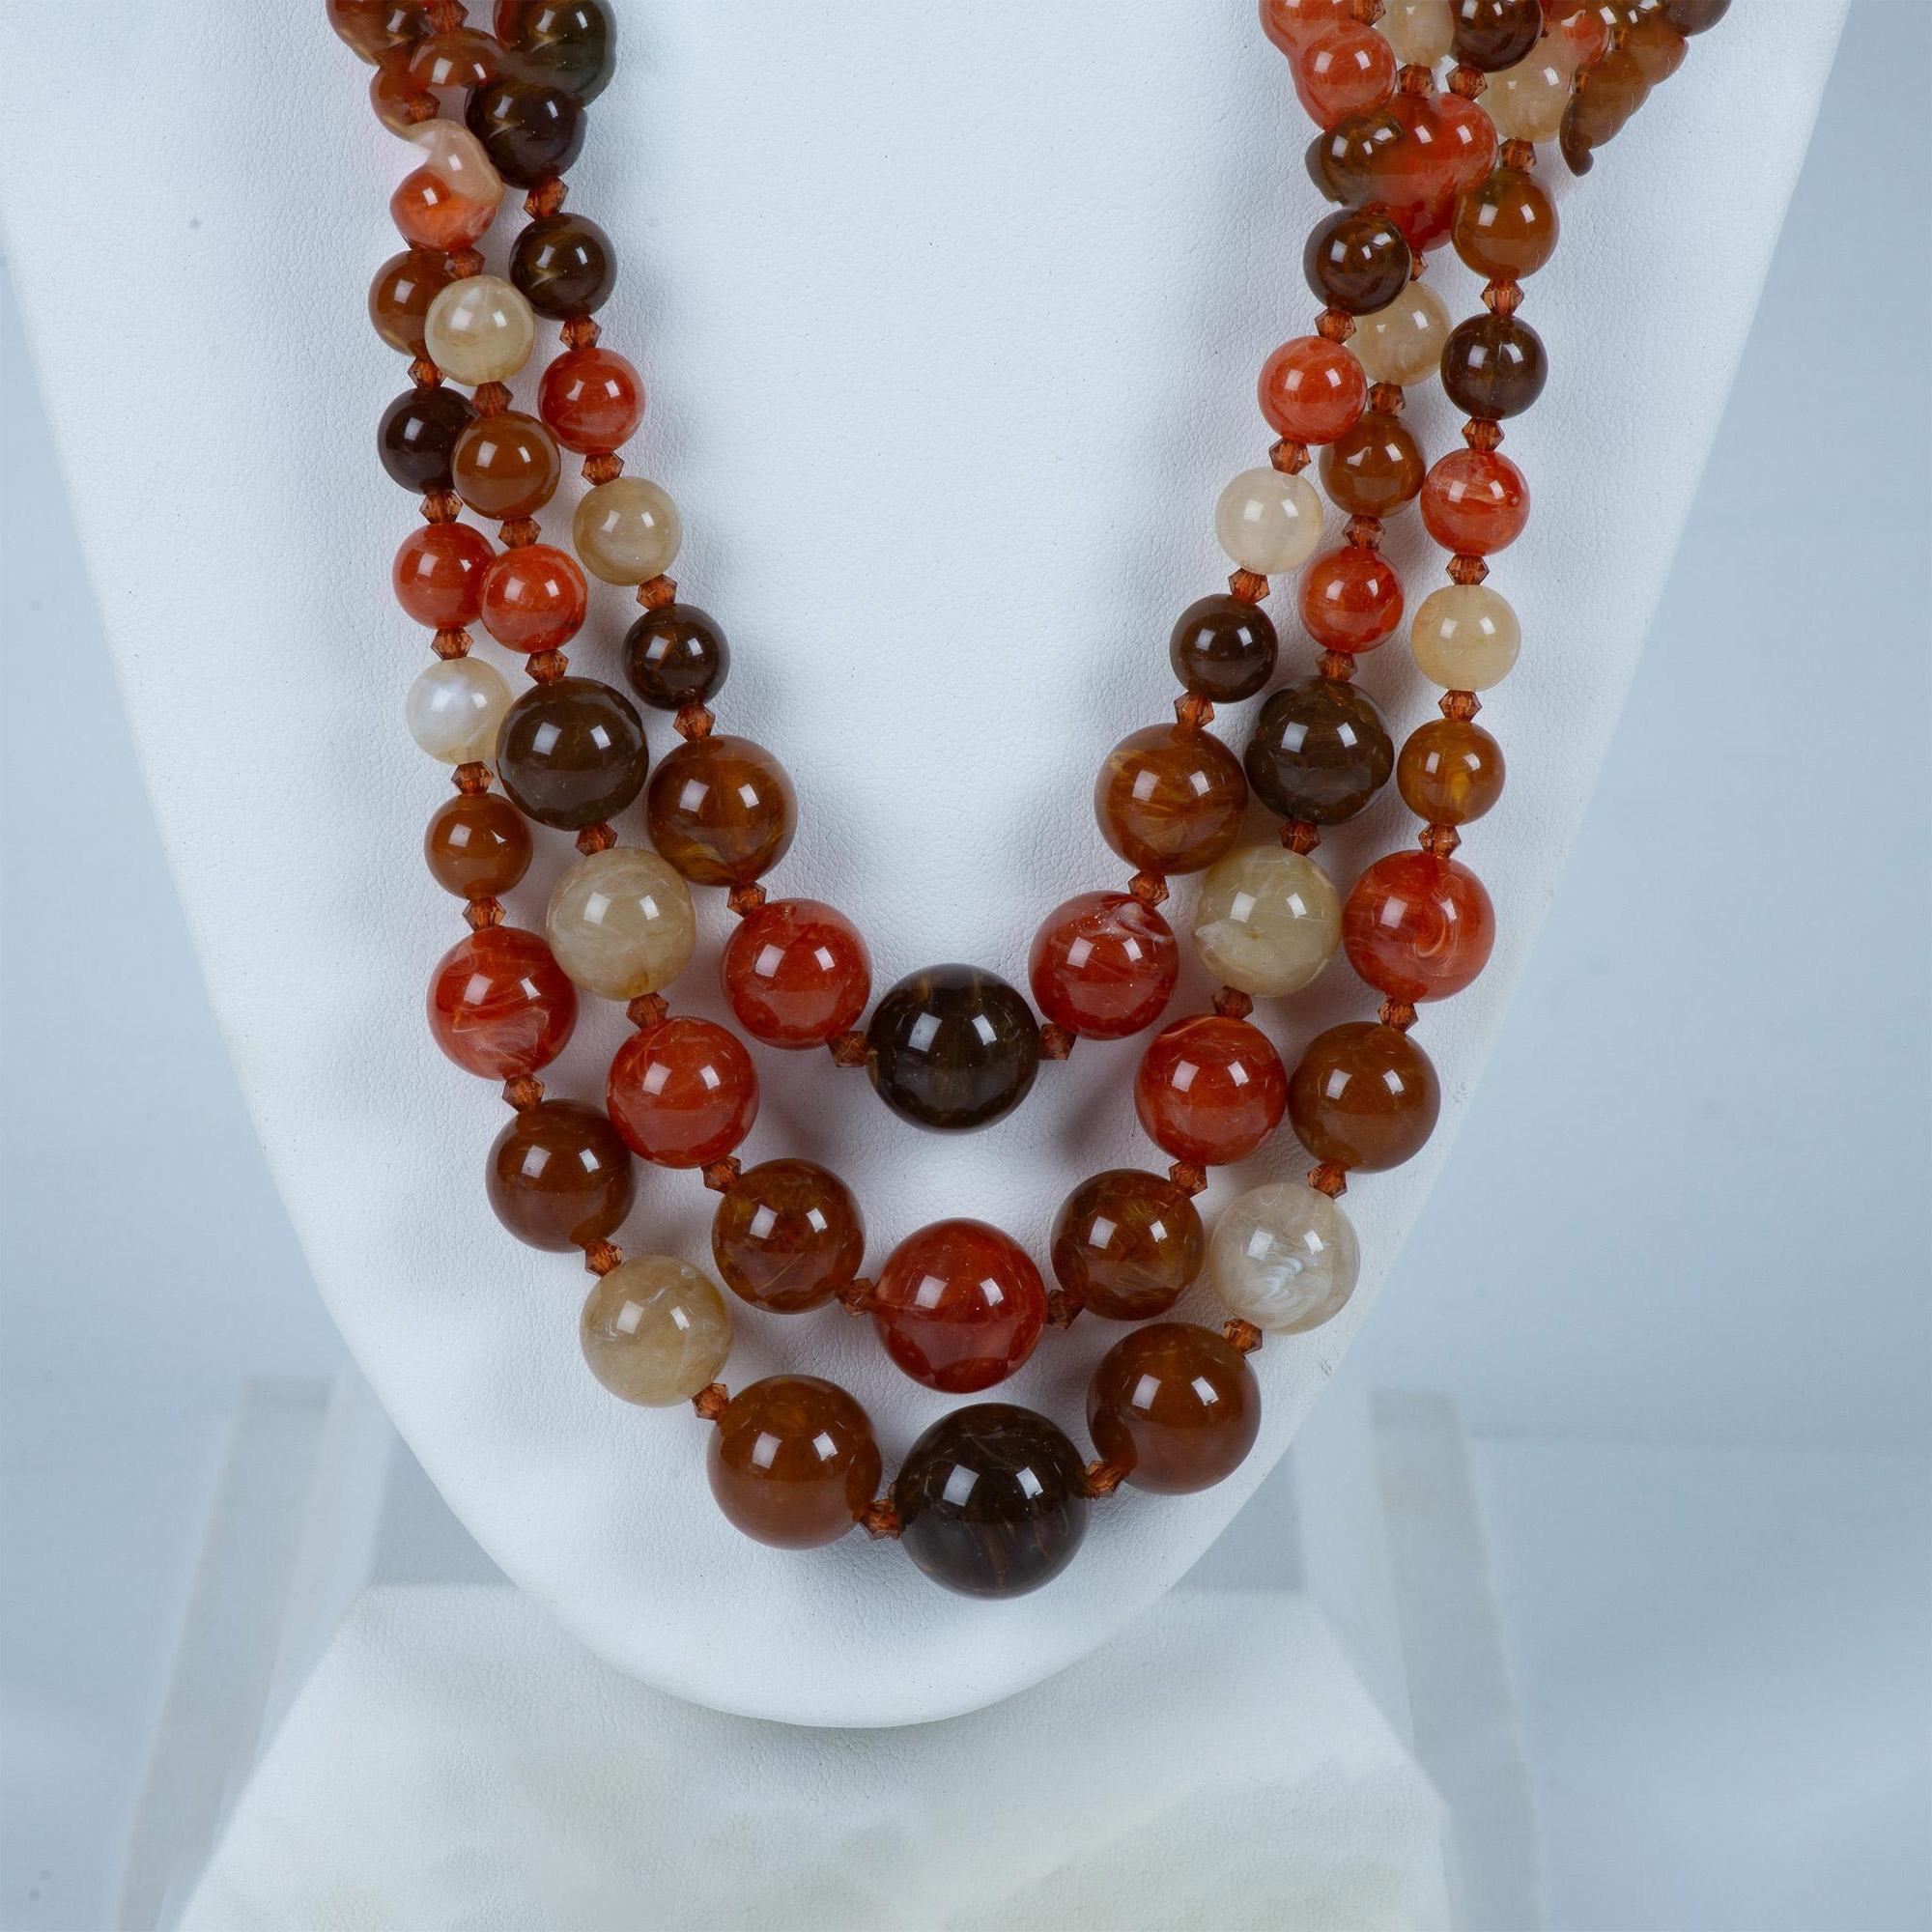 Beautiful Multi-Strand Marbled Brown & Red Bead Necklace - Image 2 of 4